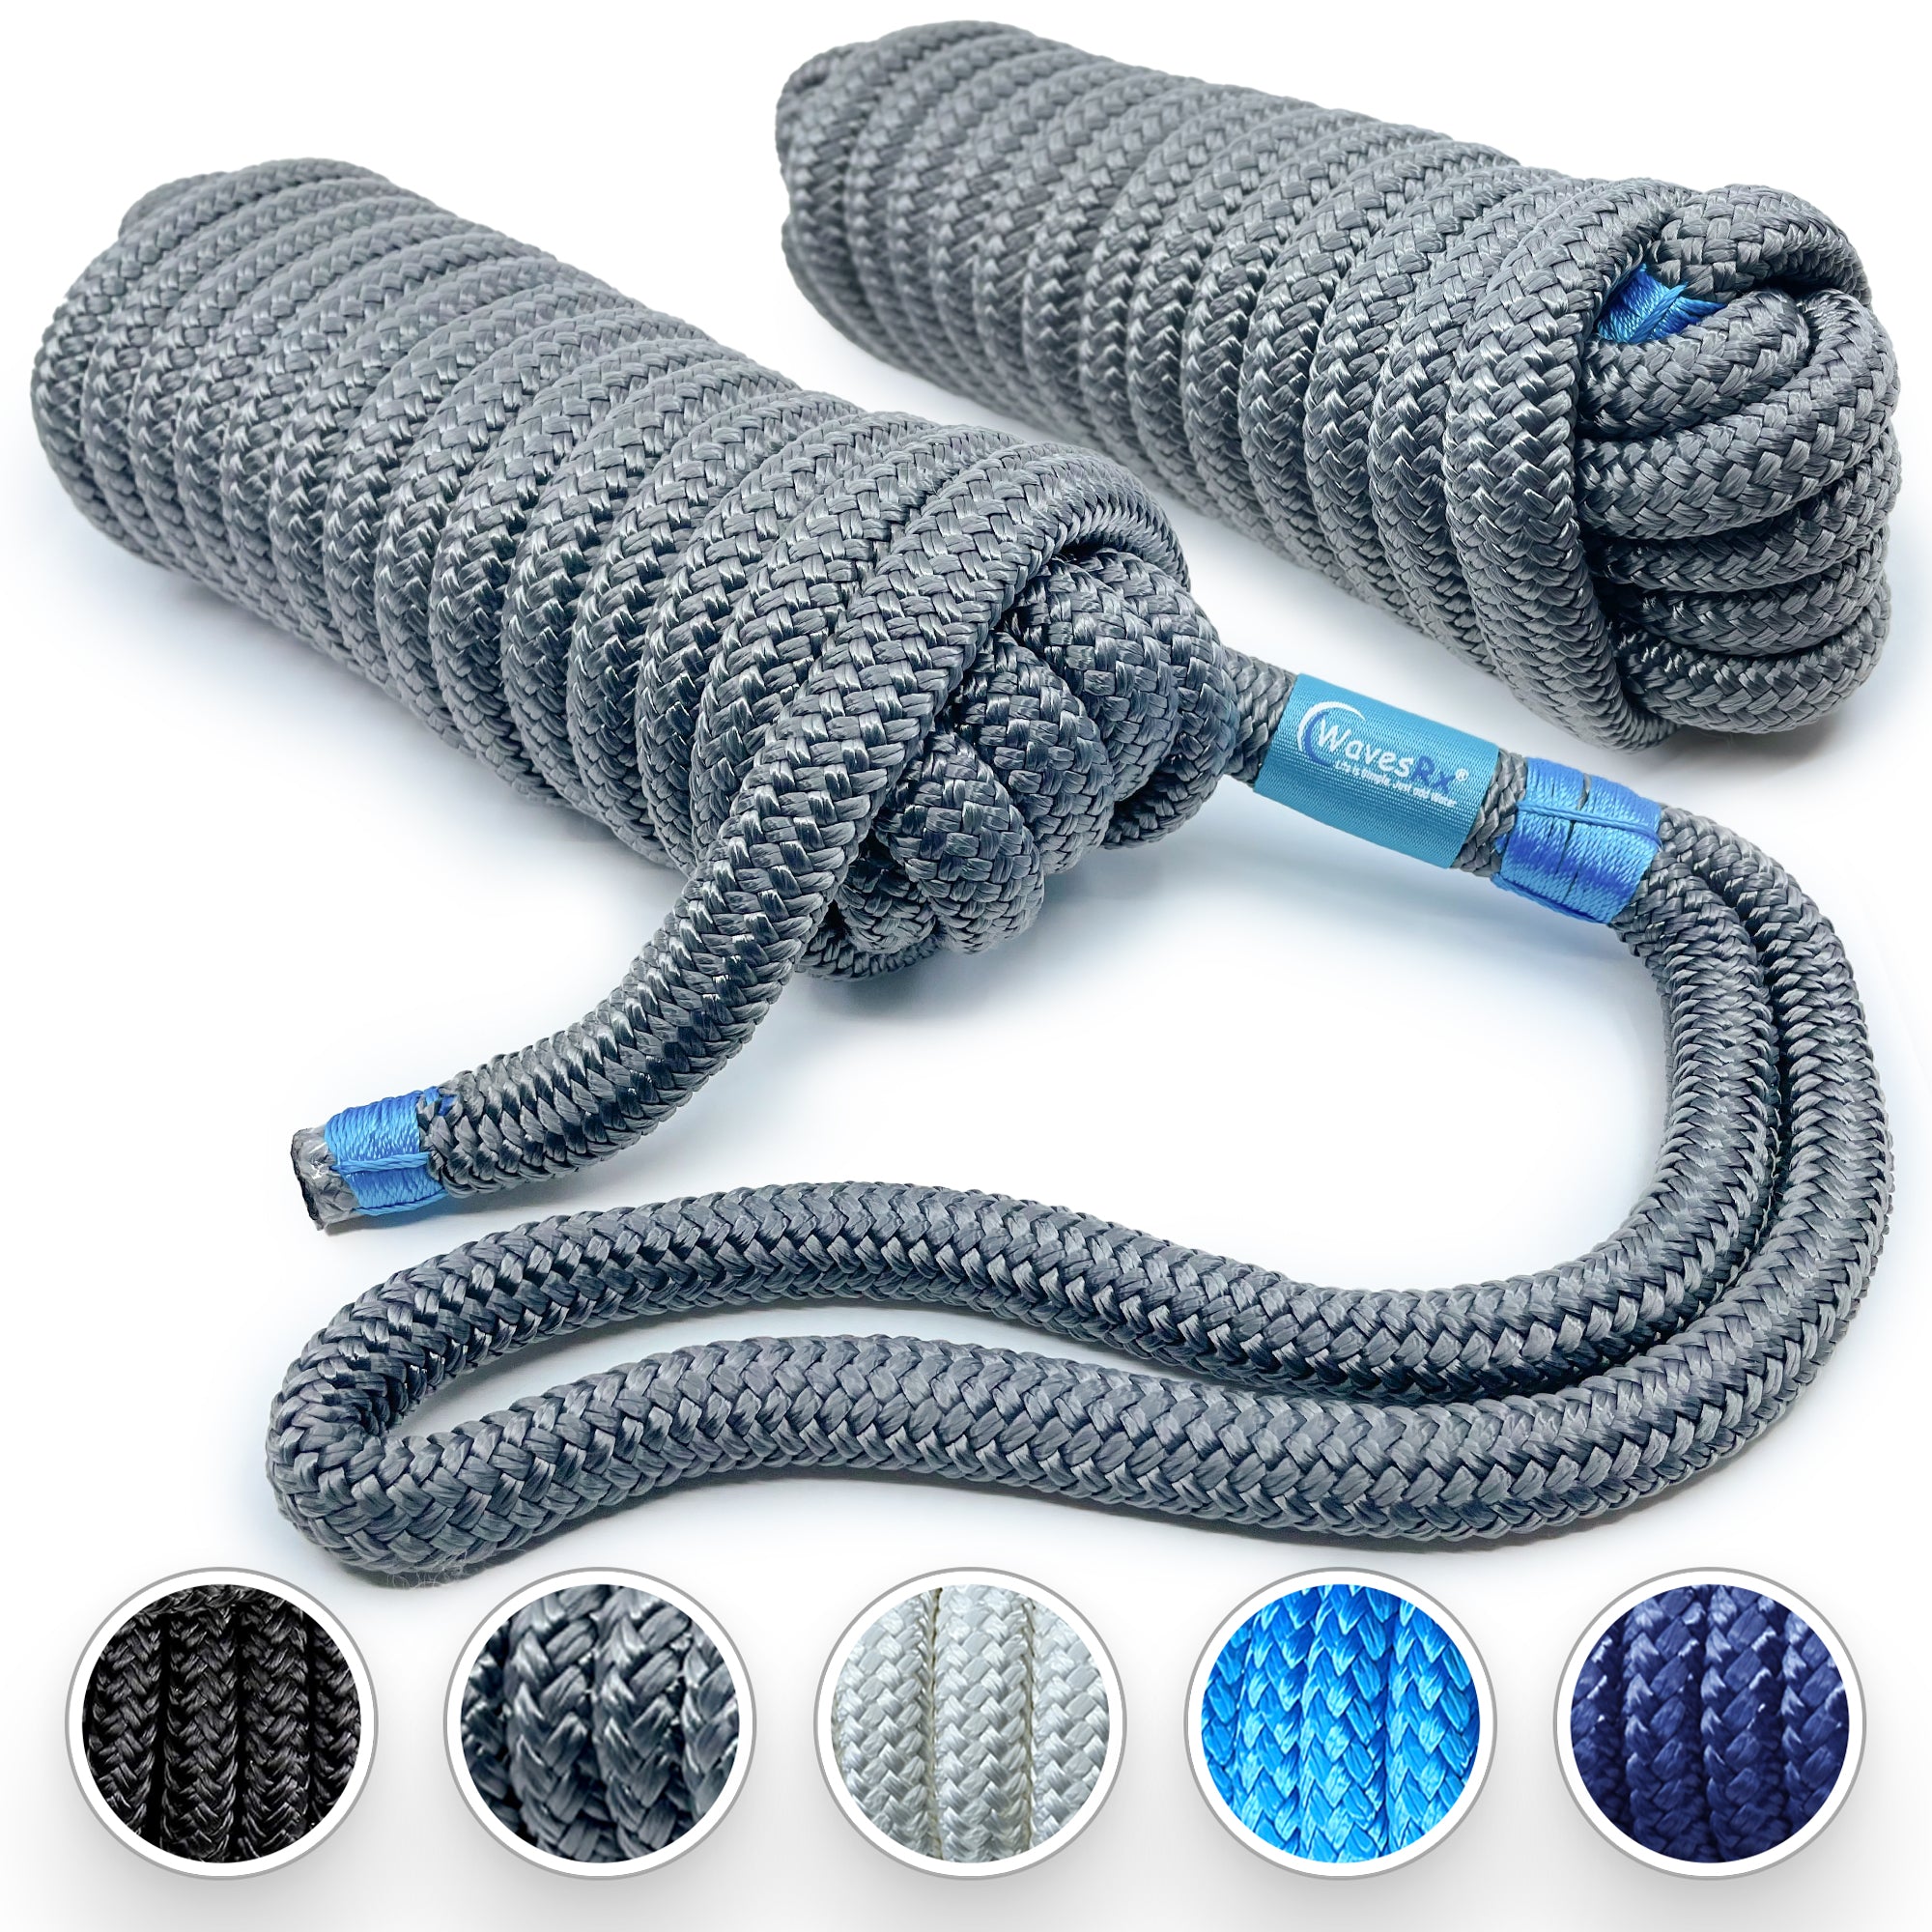  J-FM TWNTHSD Dock Lines: 5/8 x 35' Double Braided Nylon Boat  Dock Lines - Premium Boat Ropes for Secure Docking with 16 Loop - Marine  Grade Boat Rope/Dock Line - Sturdy